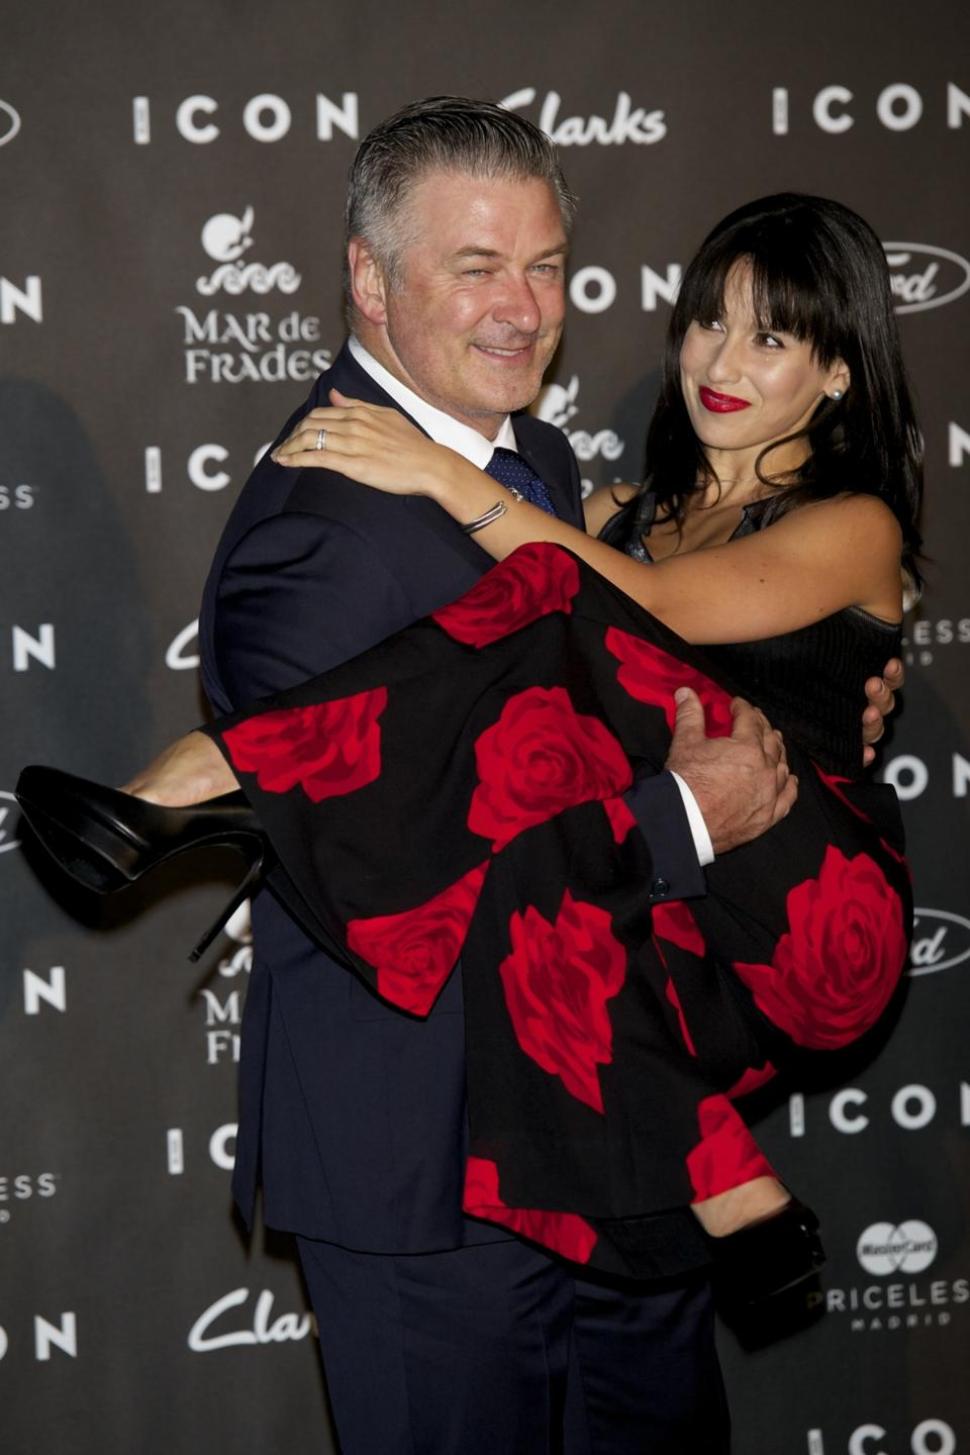 Alec Baldwin gives Hilaria a quick pick-me-up at Madrid’s ‘Icon Awards.’